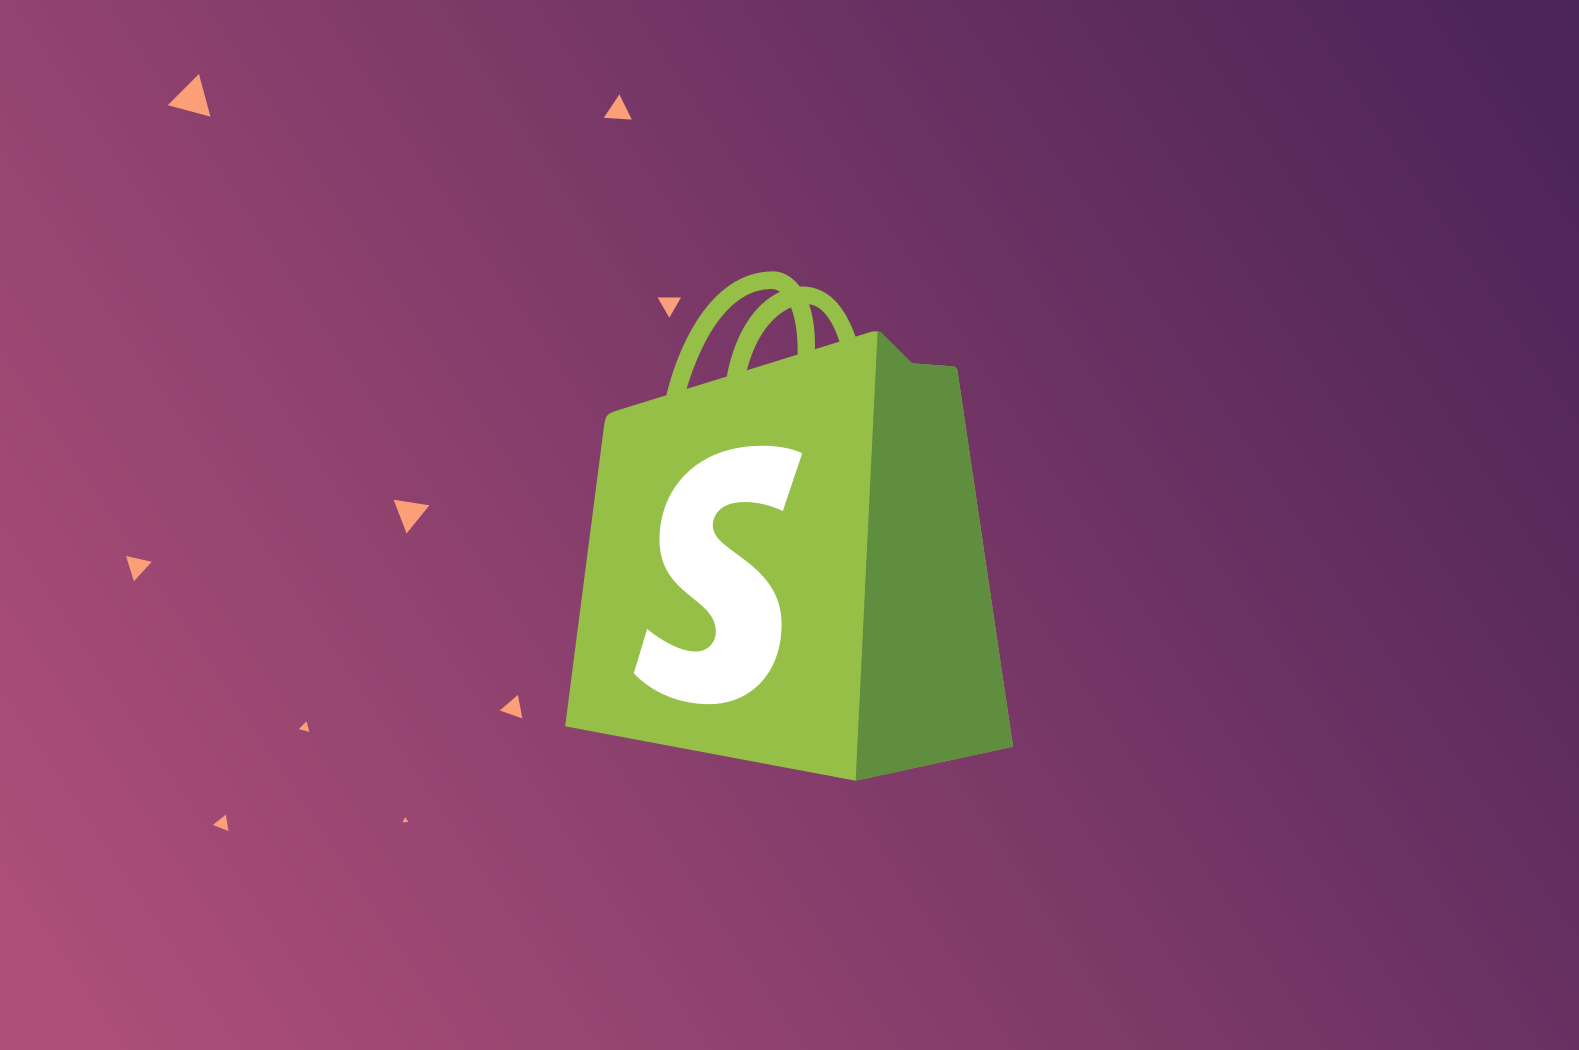 Design Shopify Apps WITHOUT Polaris